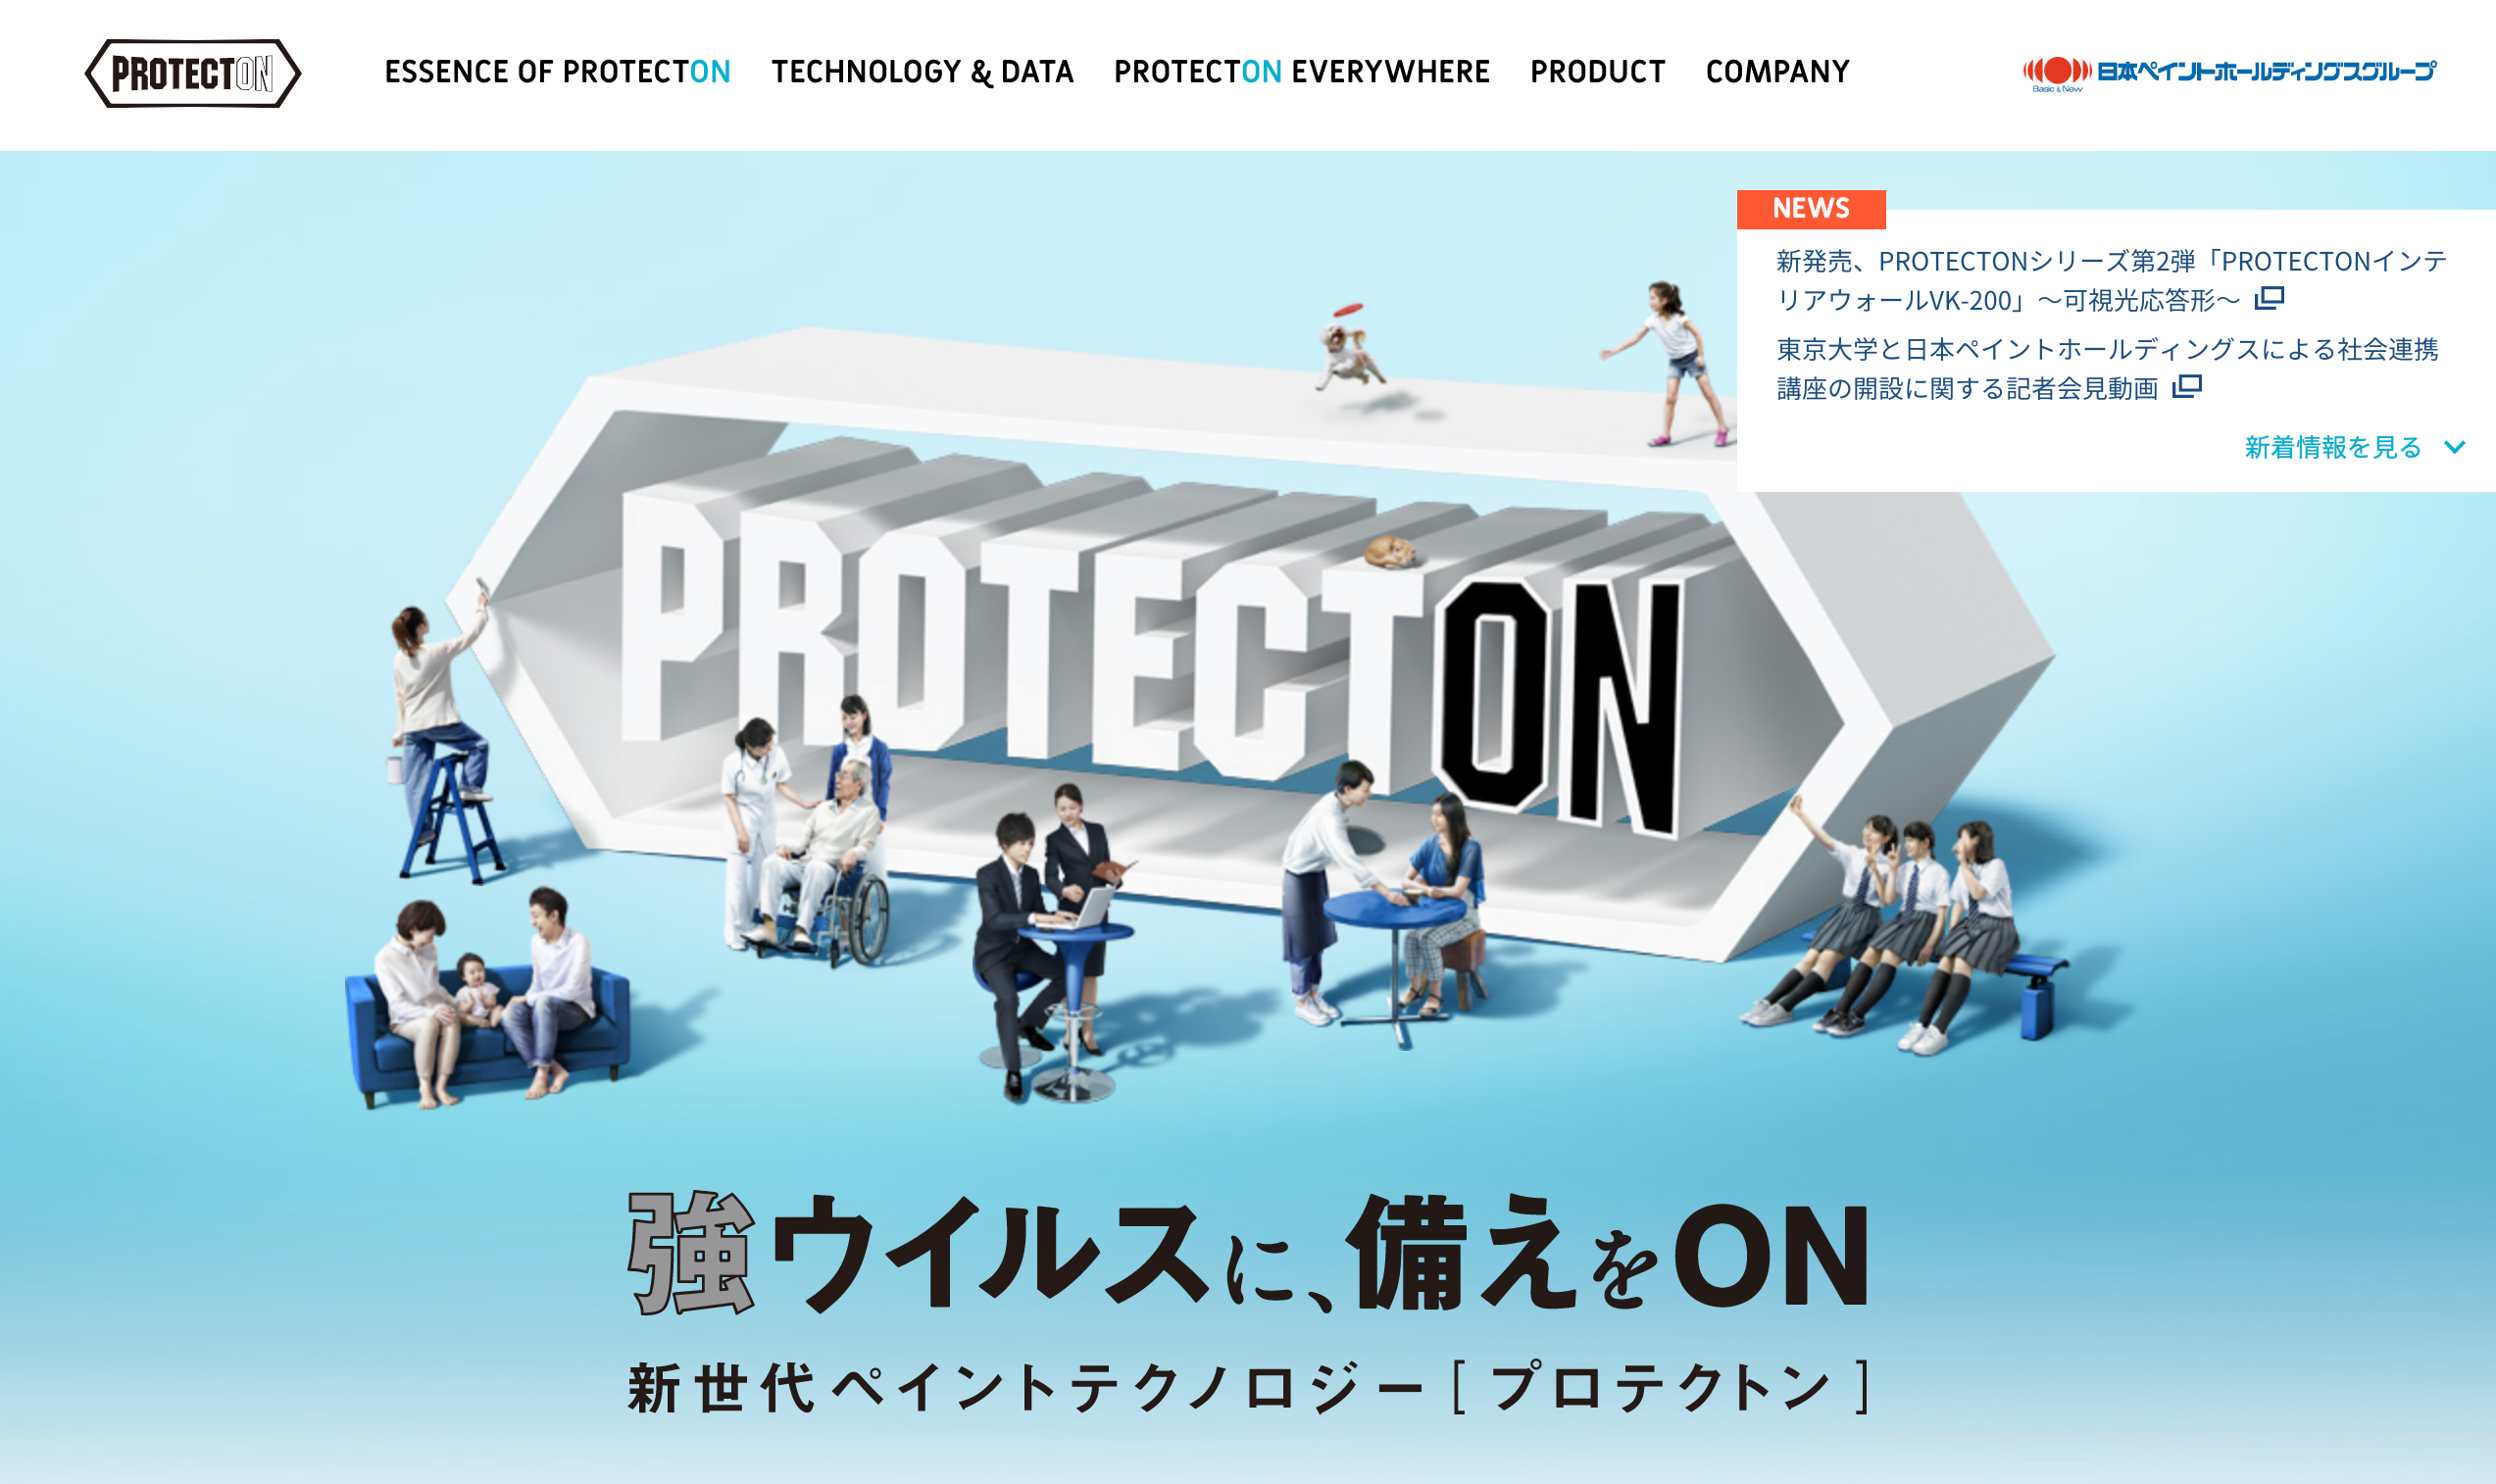 Paint Technology Brand with Antivirus and Antibacterial Functionality “PROTECTON” Brand Site Opens Today